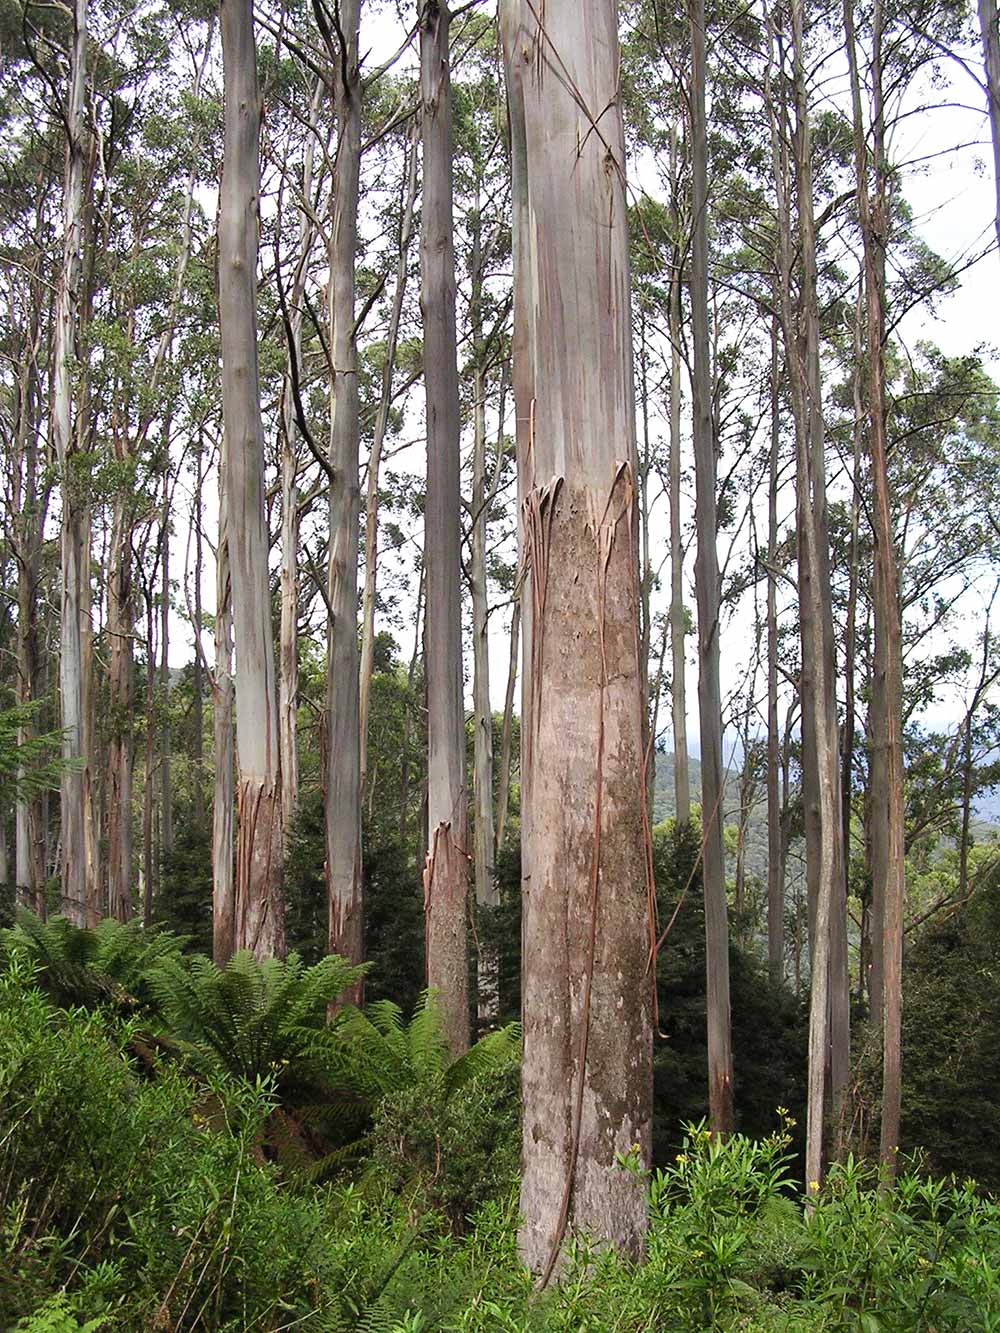 The story of our eucalypts